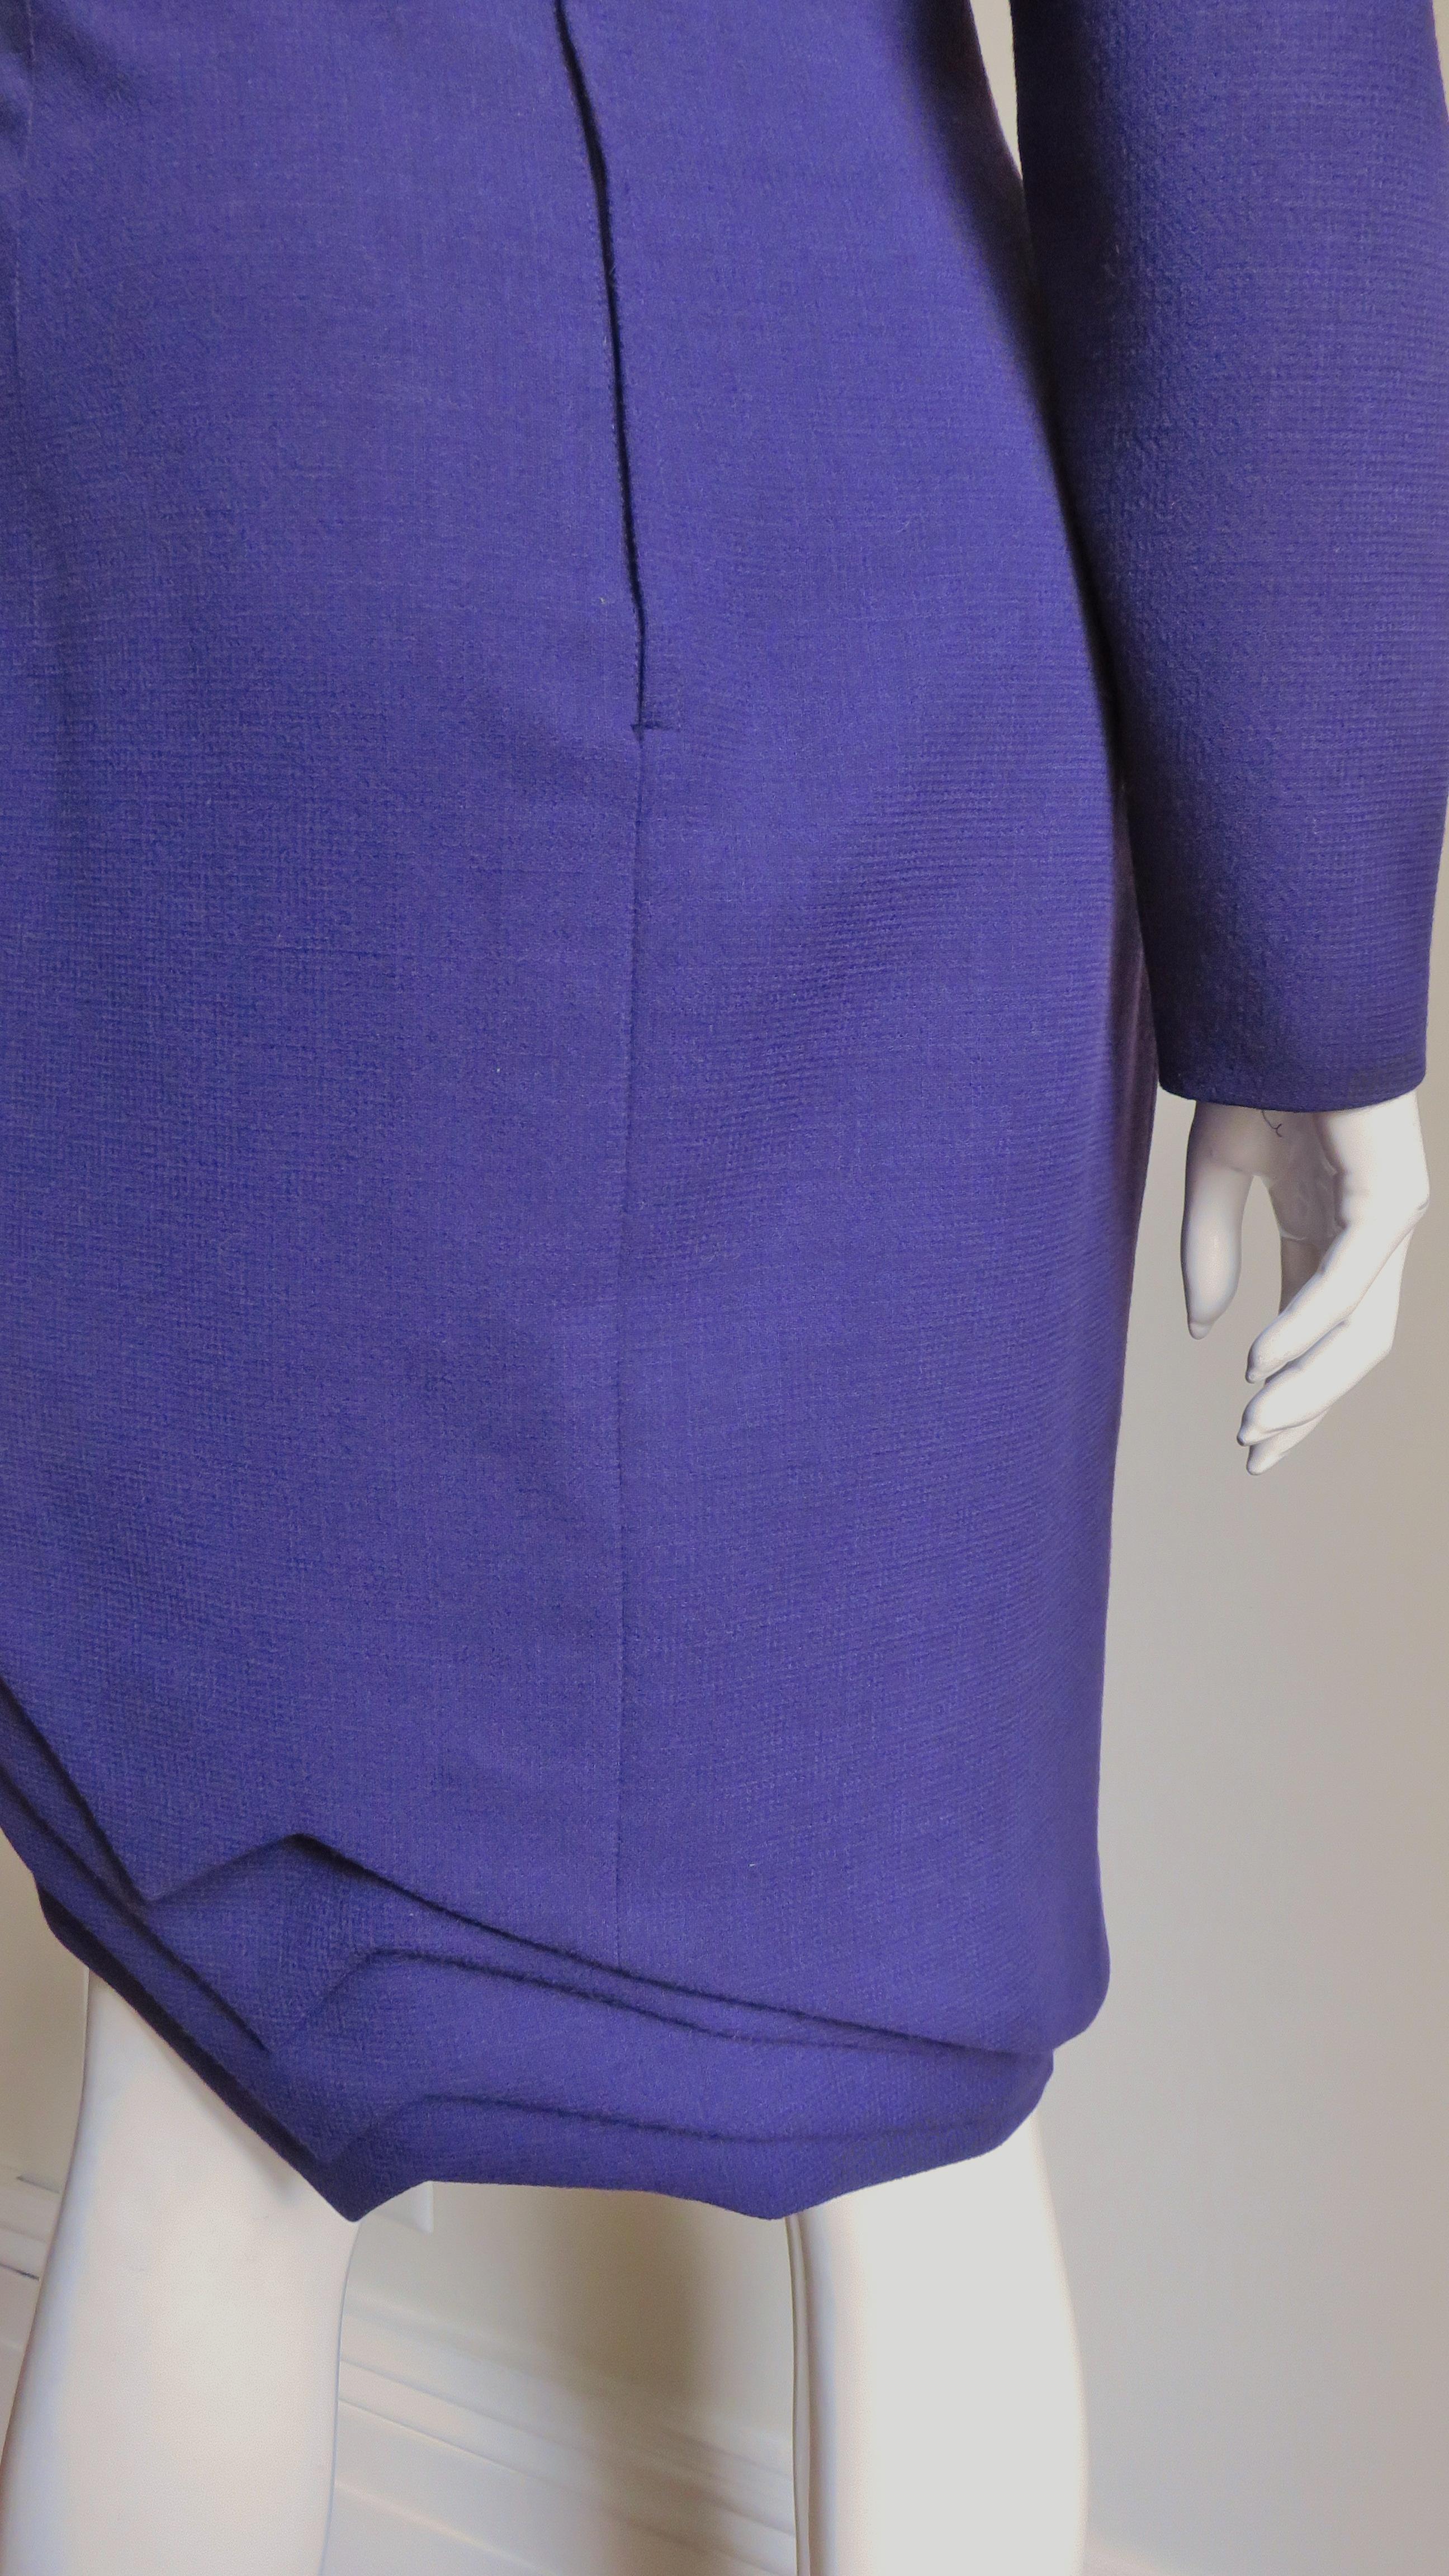 Gianni Versace Purple 1990s Dress with Origami Hem  For Sale 4